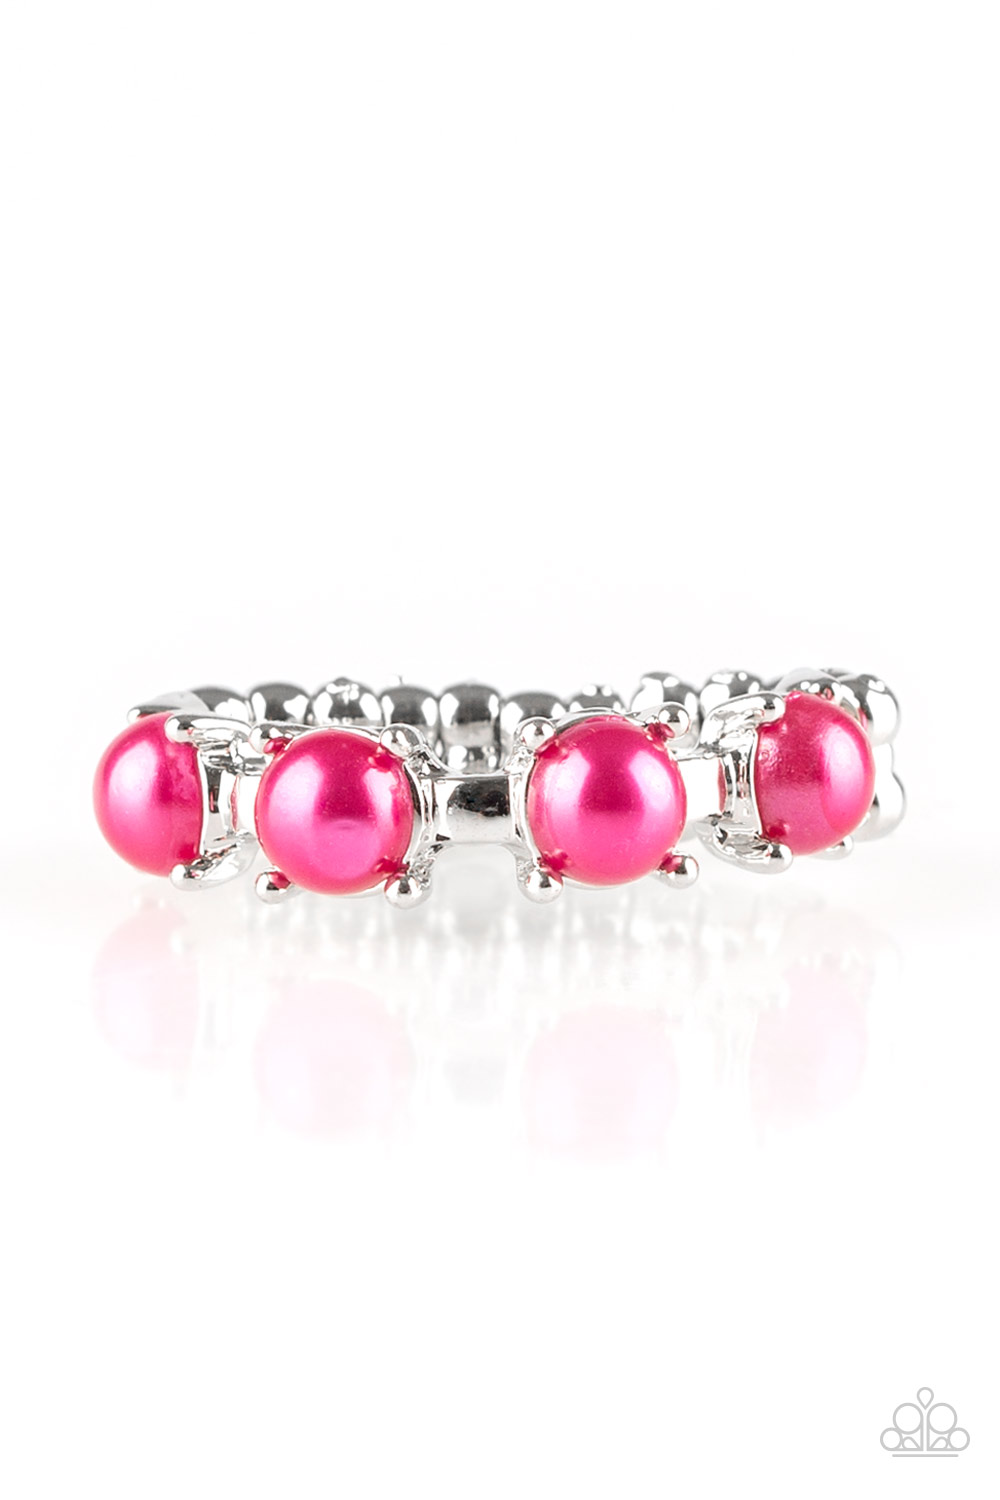 Paparazzi Accessories: More Or PRICELESS - Pink